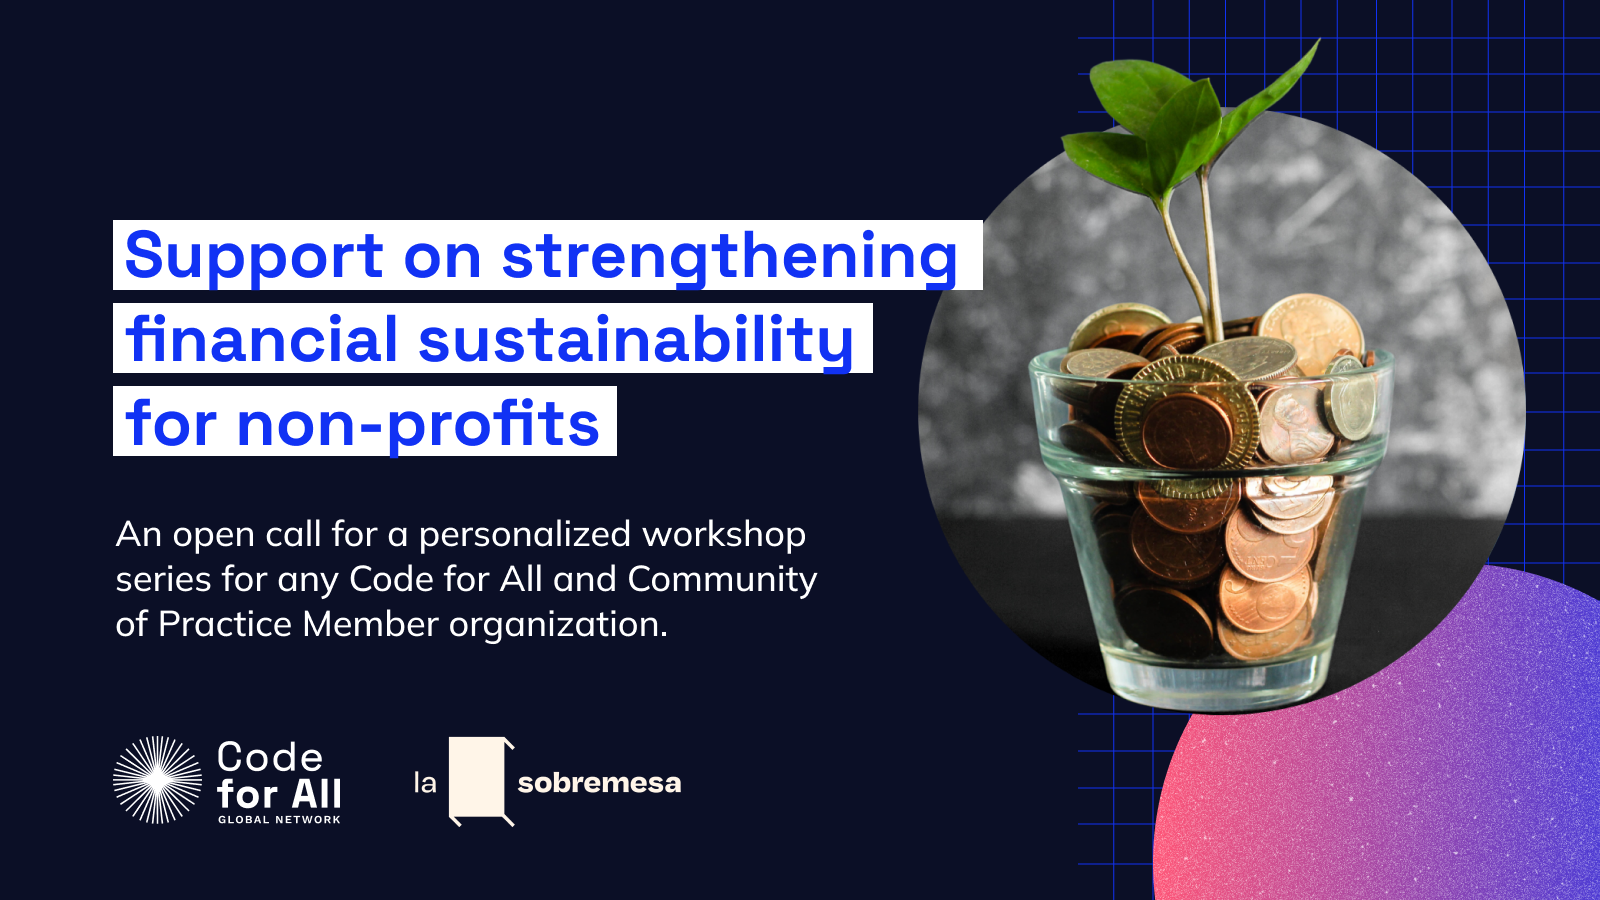 Image text: Support on strengthening financial sustainability for non-profits. An open call for a personalized workshop series for any Code for All and Community of Practice Member organization.